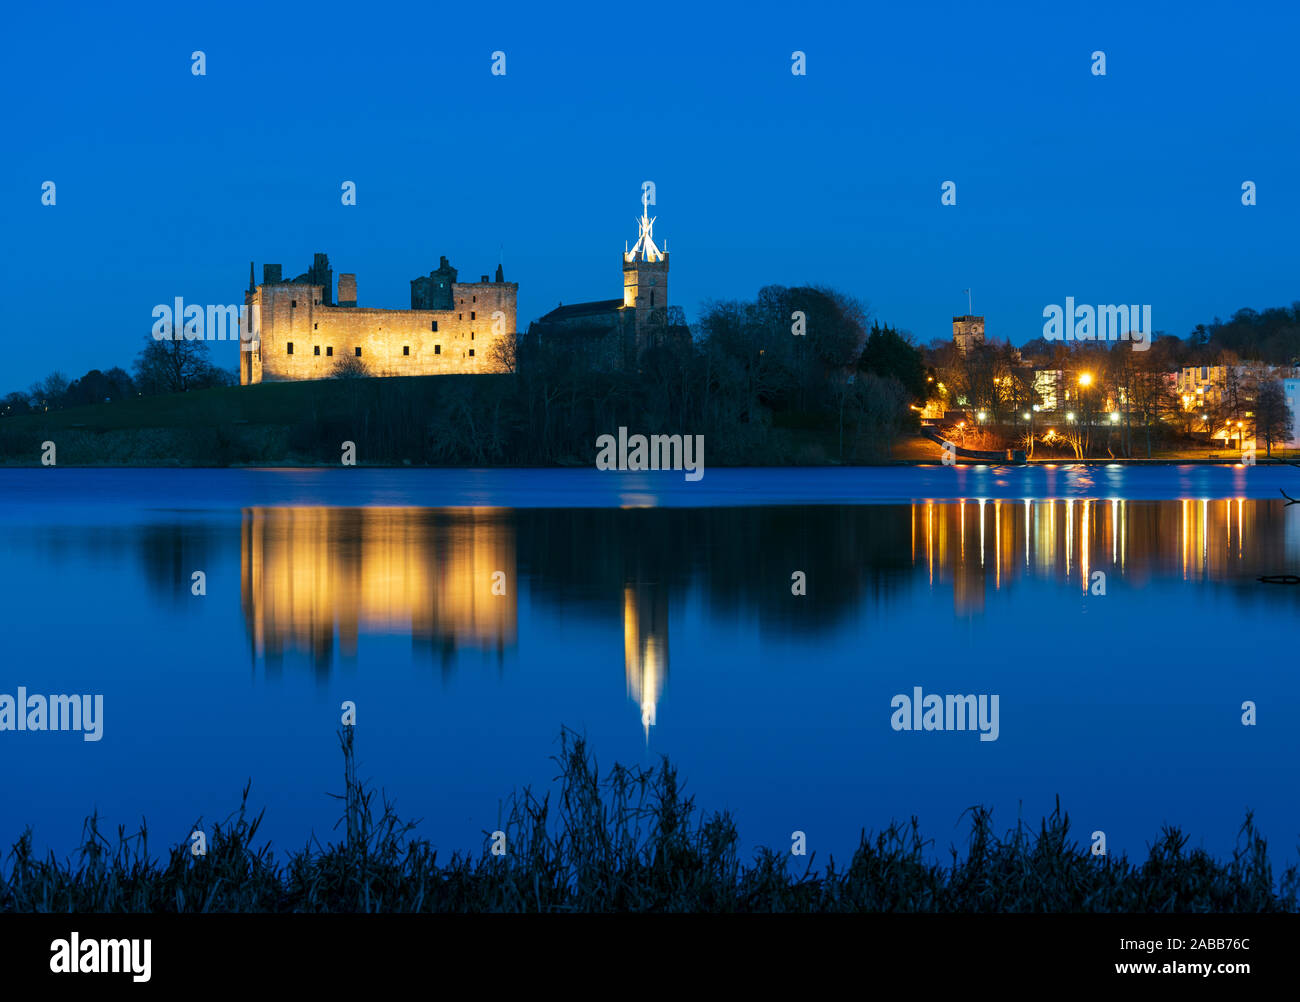 View of Linlithgow Palace at night in Linlithgow, West Lothian, Scotland, UK. Birthplace of Mary Queen of Scots. Stock Photo